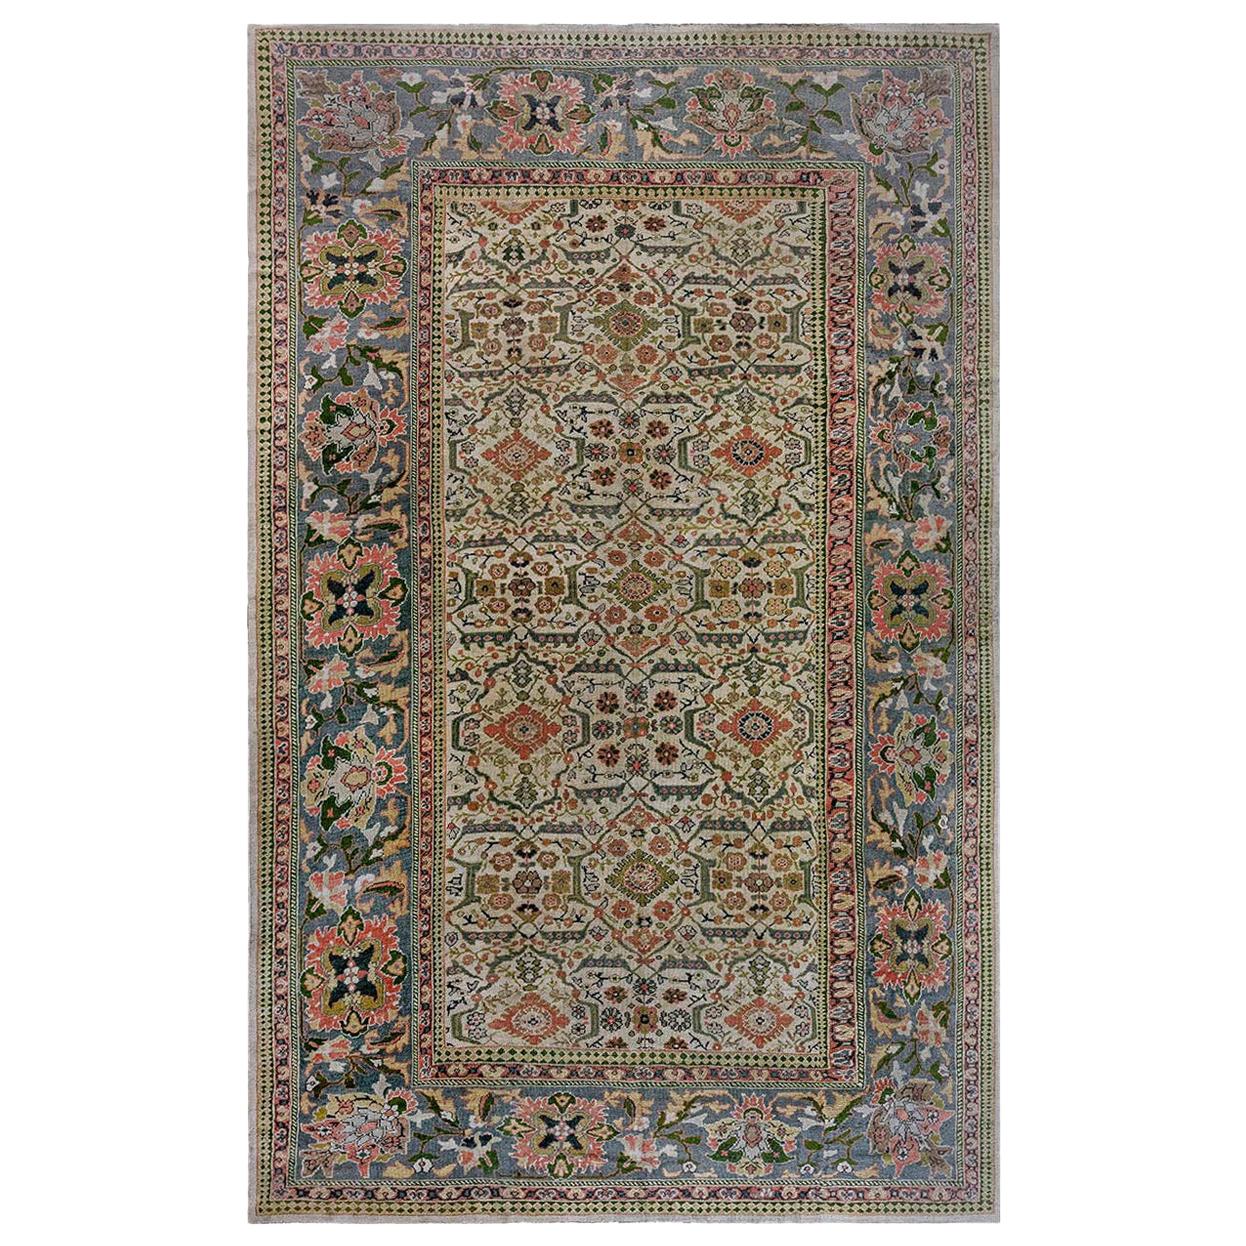 Antique Persian Sultanabad Rug Size Adjusted For Sale